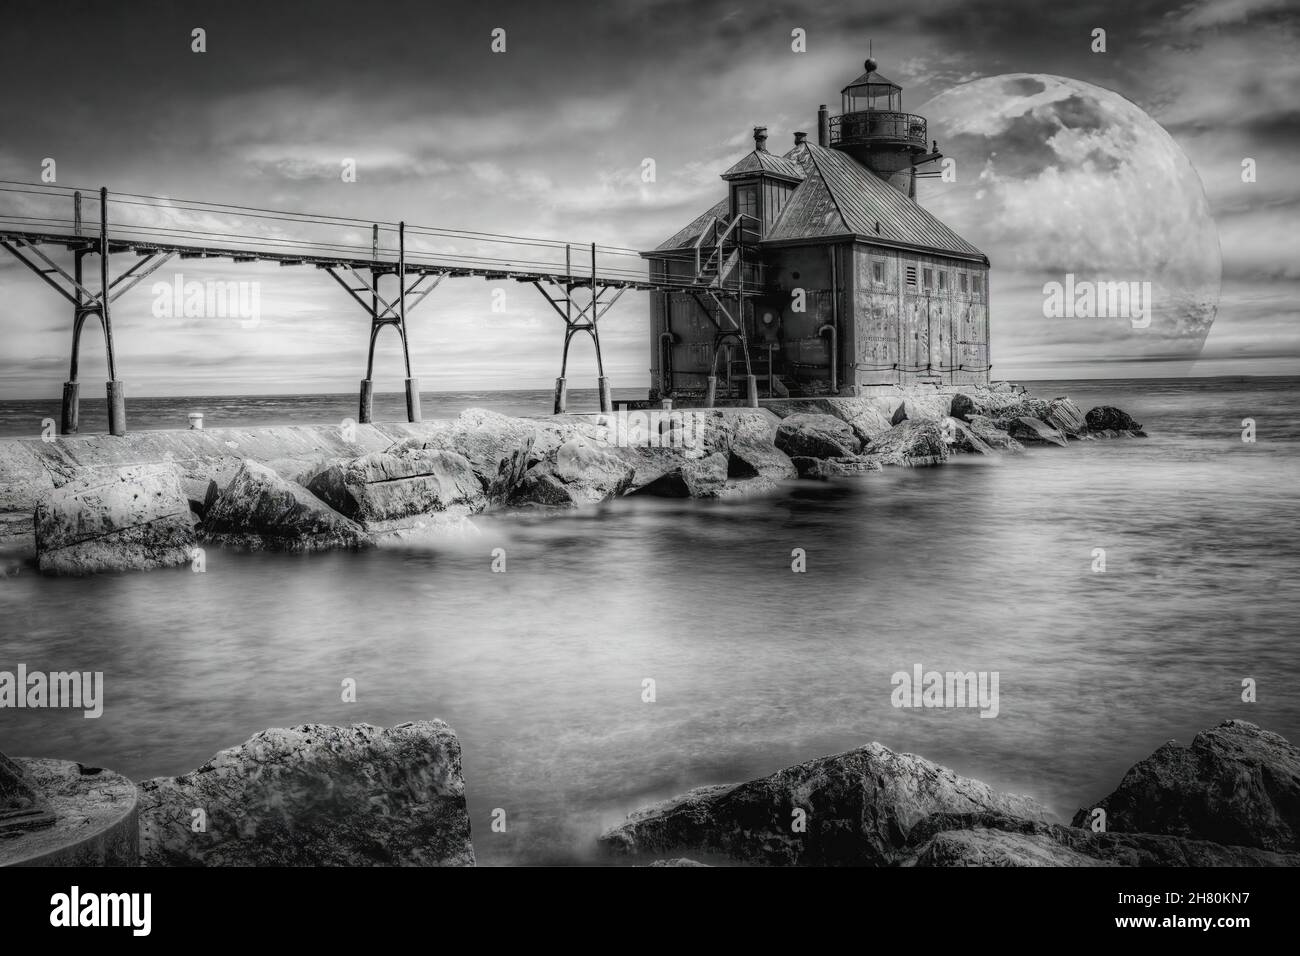 This is the Coast Guard lighthouse and breakwall at the east entrance to the Sturgeon Bay hipping canal that connects Green Bay to Lake Michigan in Wi Stock Photo